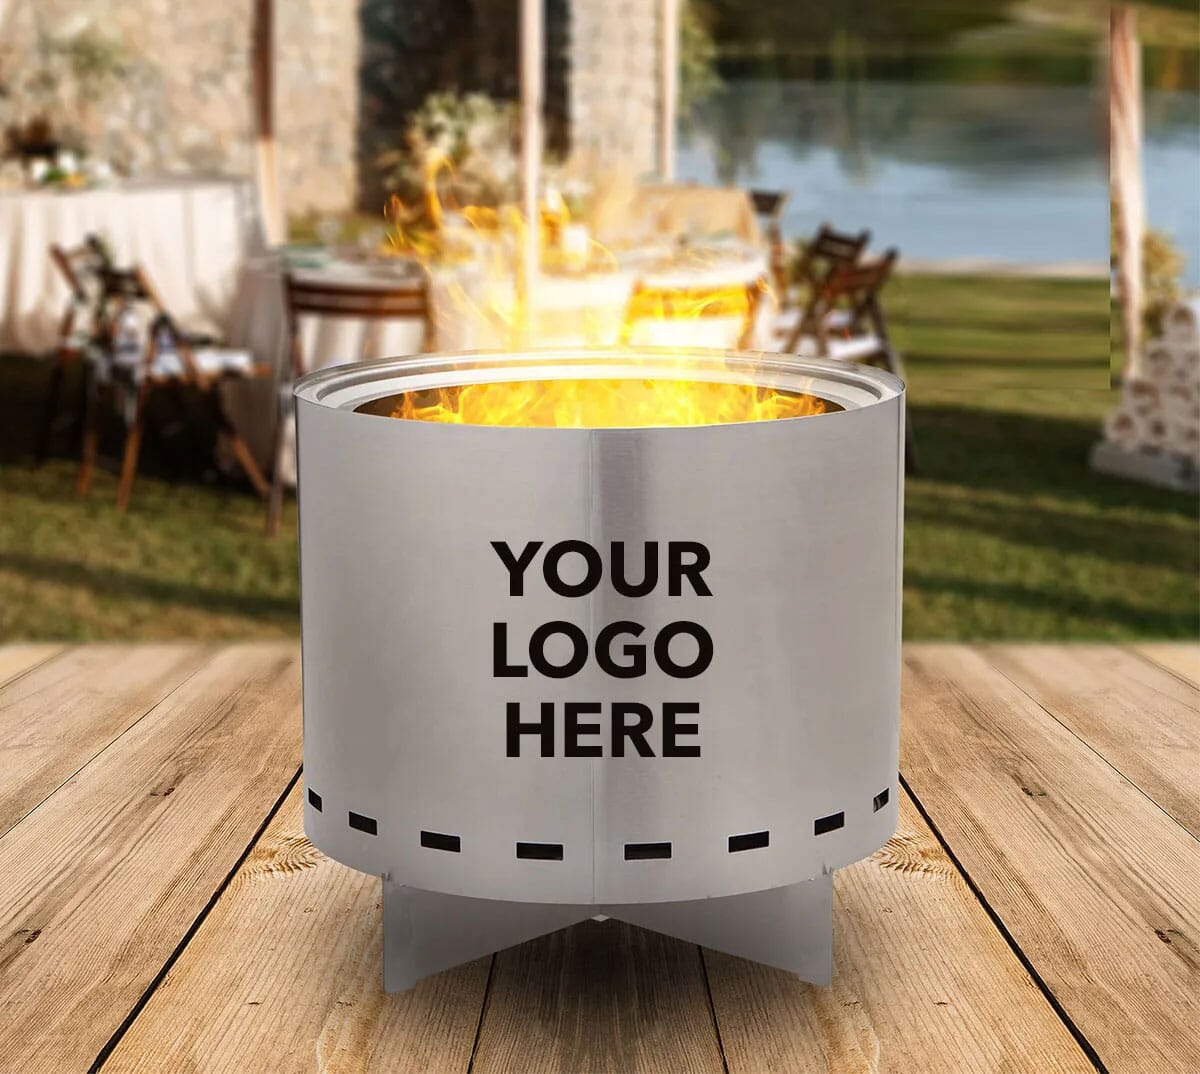 Stainless steel firepit